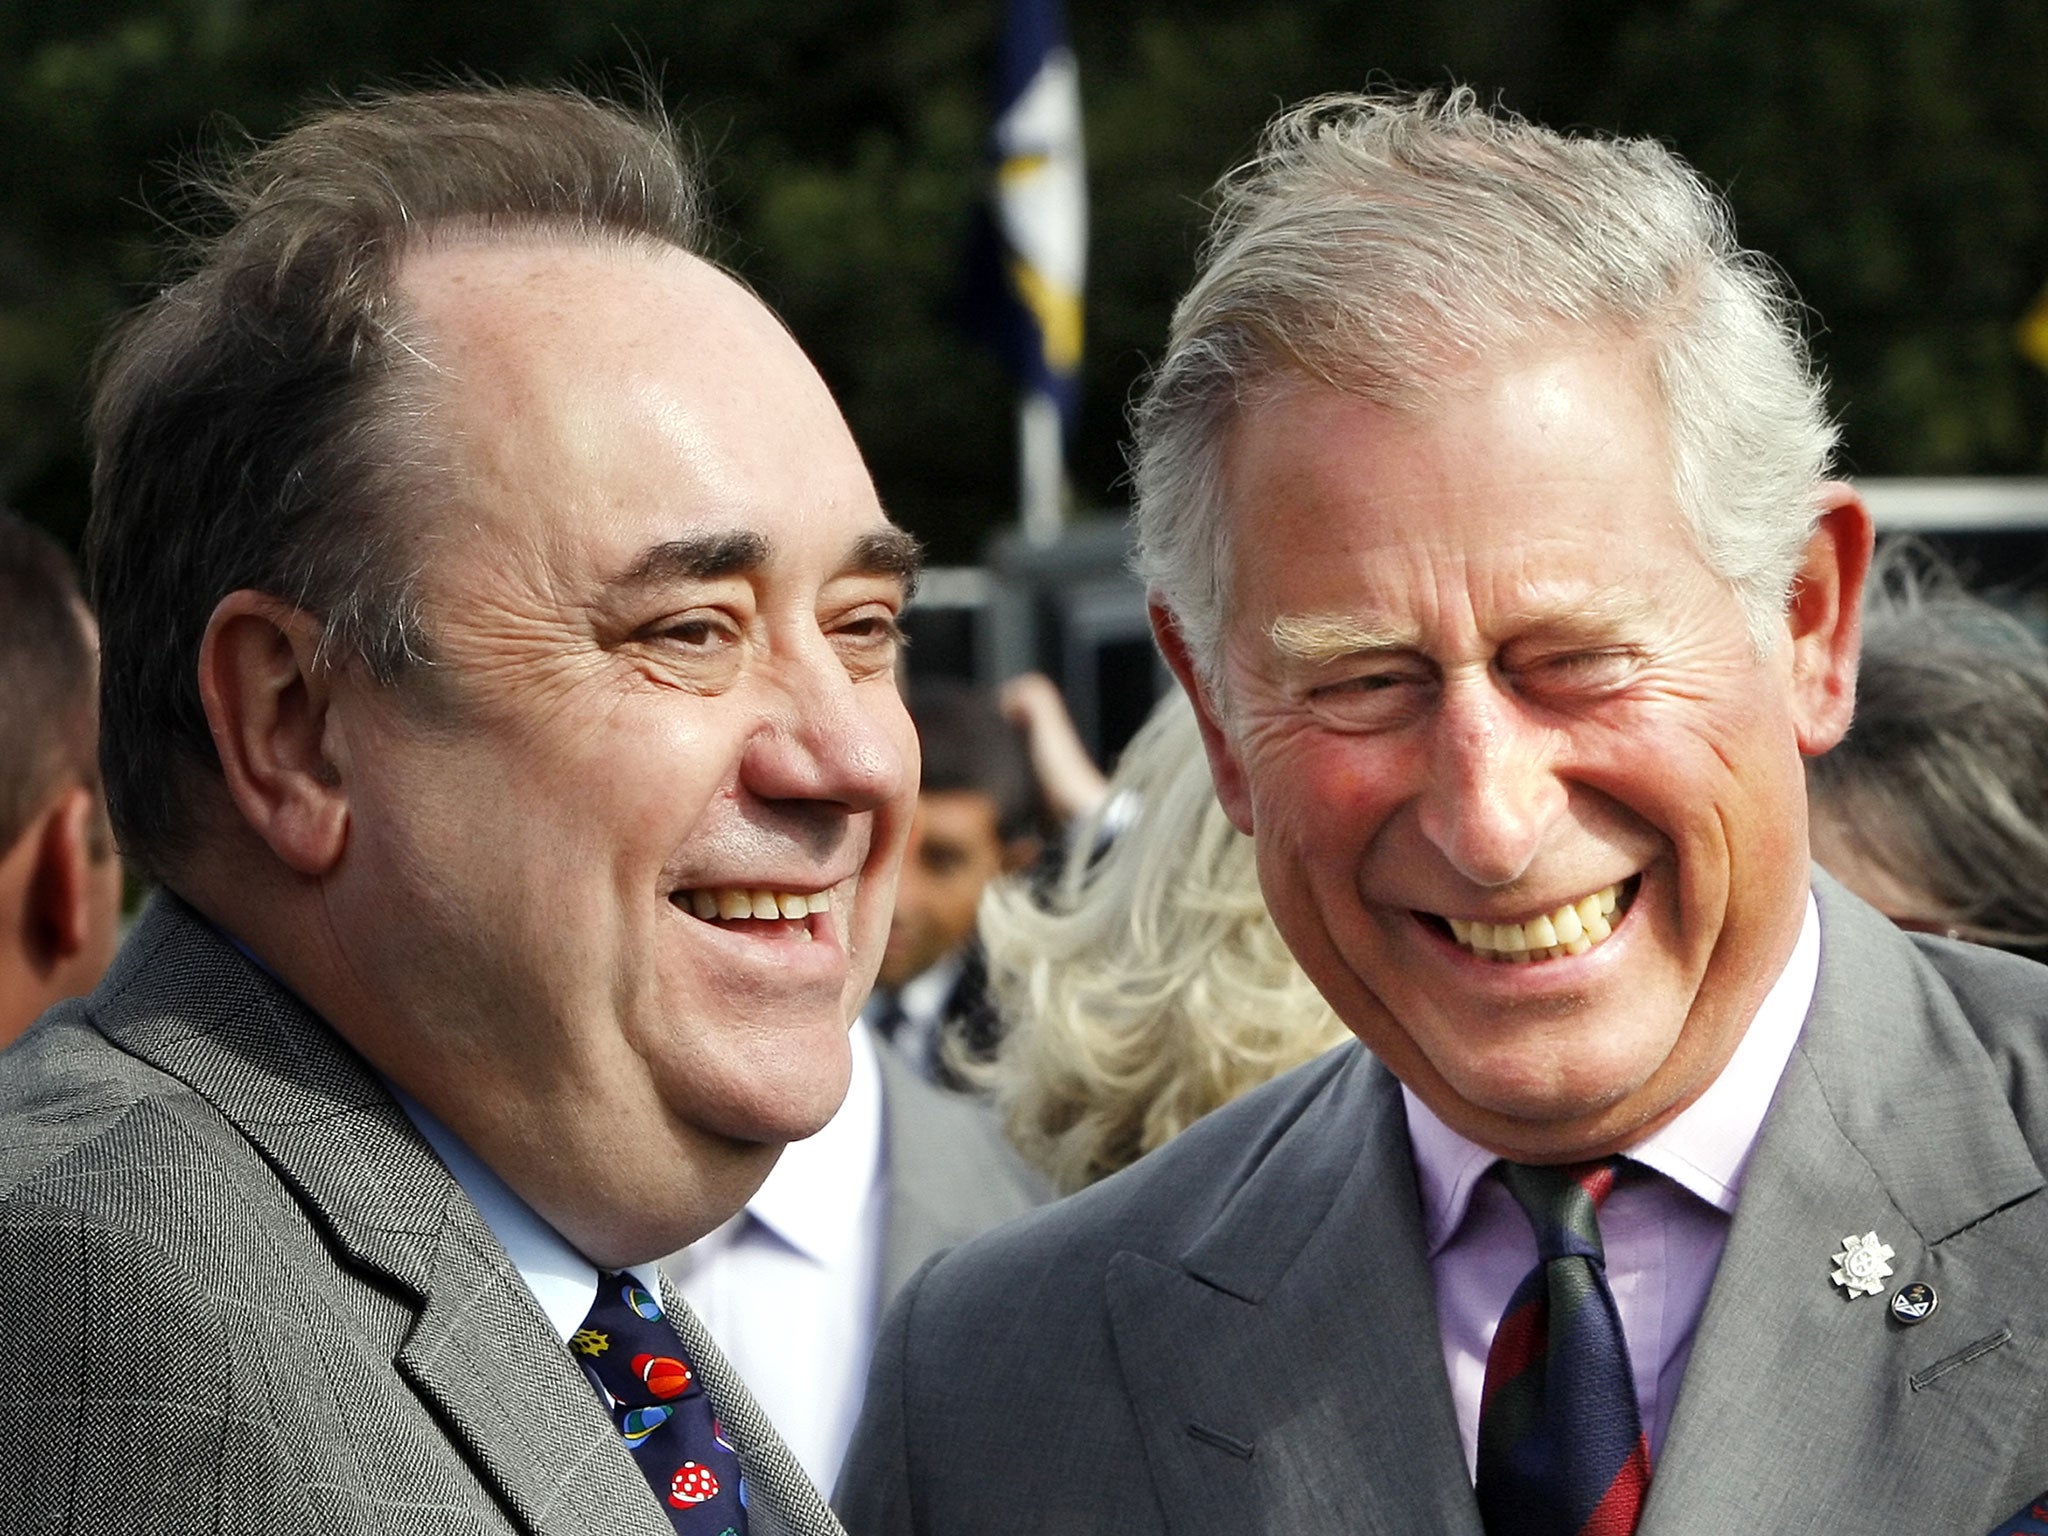 According to newly-released correspondence, Prince Charles privately lobbied Alex Salmond as Scotland’s First Minister to seek money or political backing for causes including a stately home and his Highlands food brand